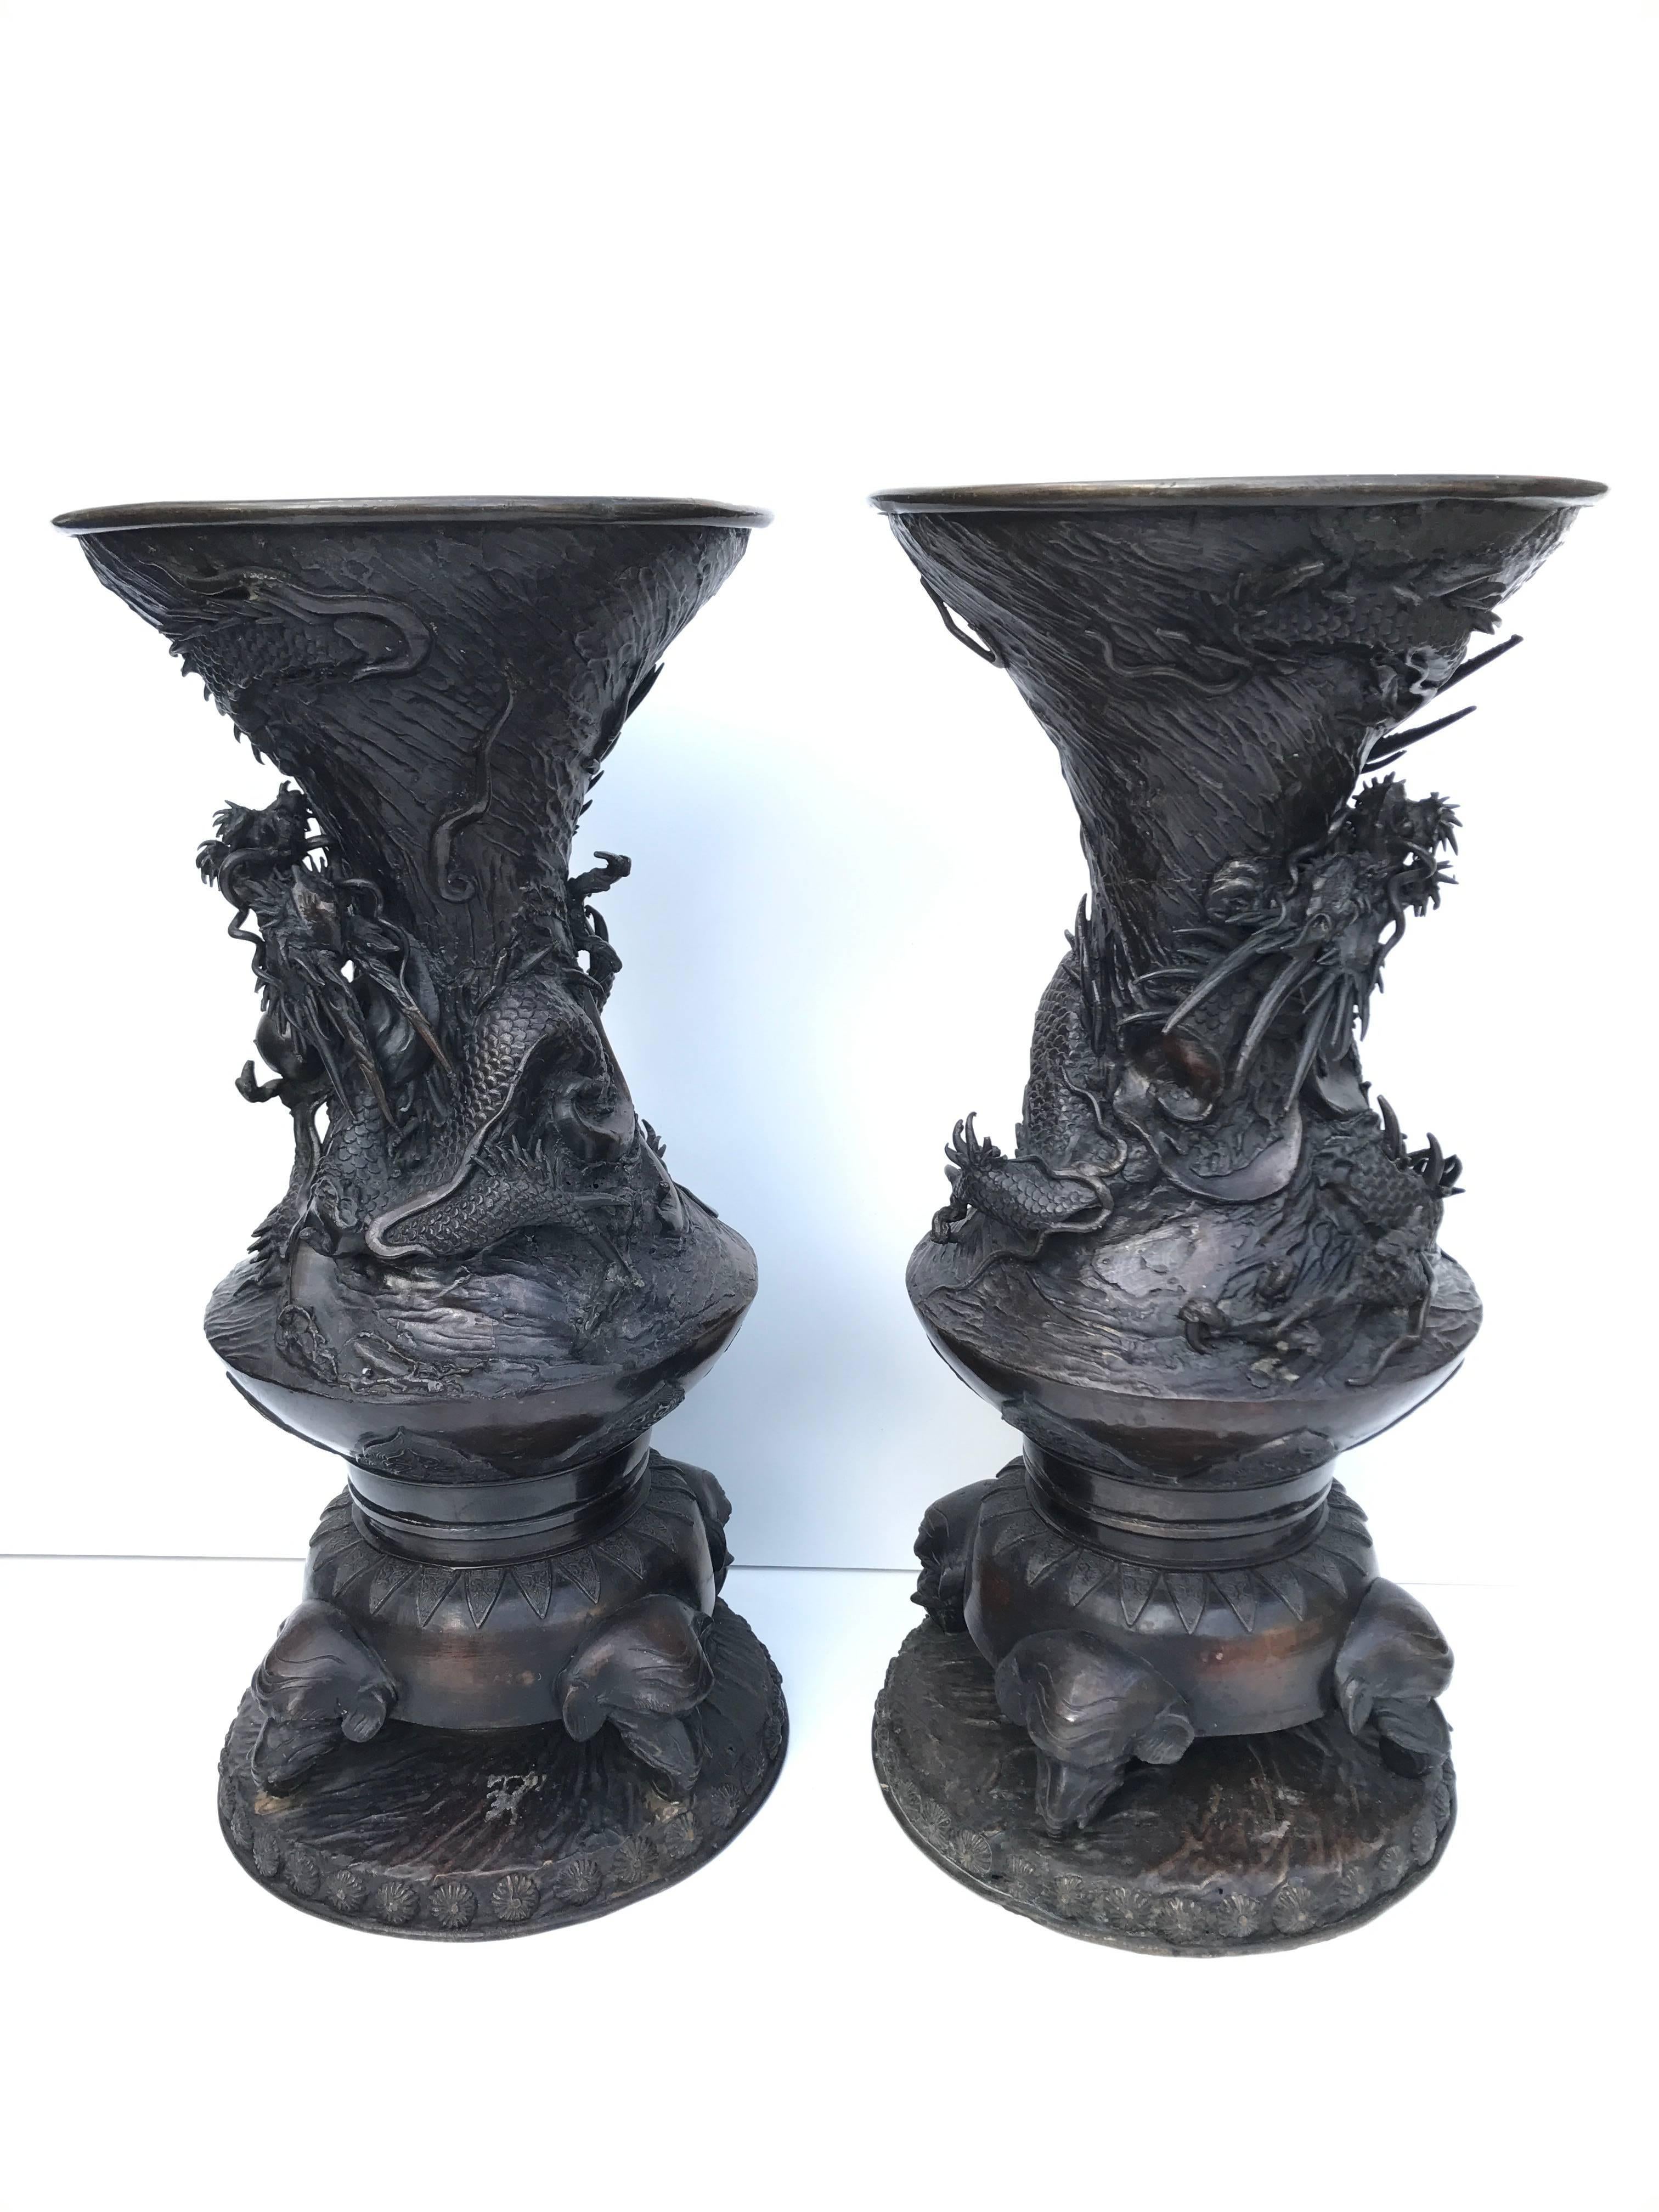 Large Japanese Meiji style period bronze dragon urns.
Beautifully casted bronze urns with a majestic dragon going in and coming out from the urn, chasing the flaming pearl. This pair is just absolutely magnificent and the details are amazing,